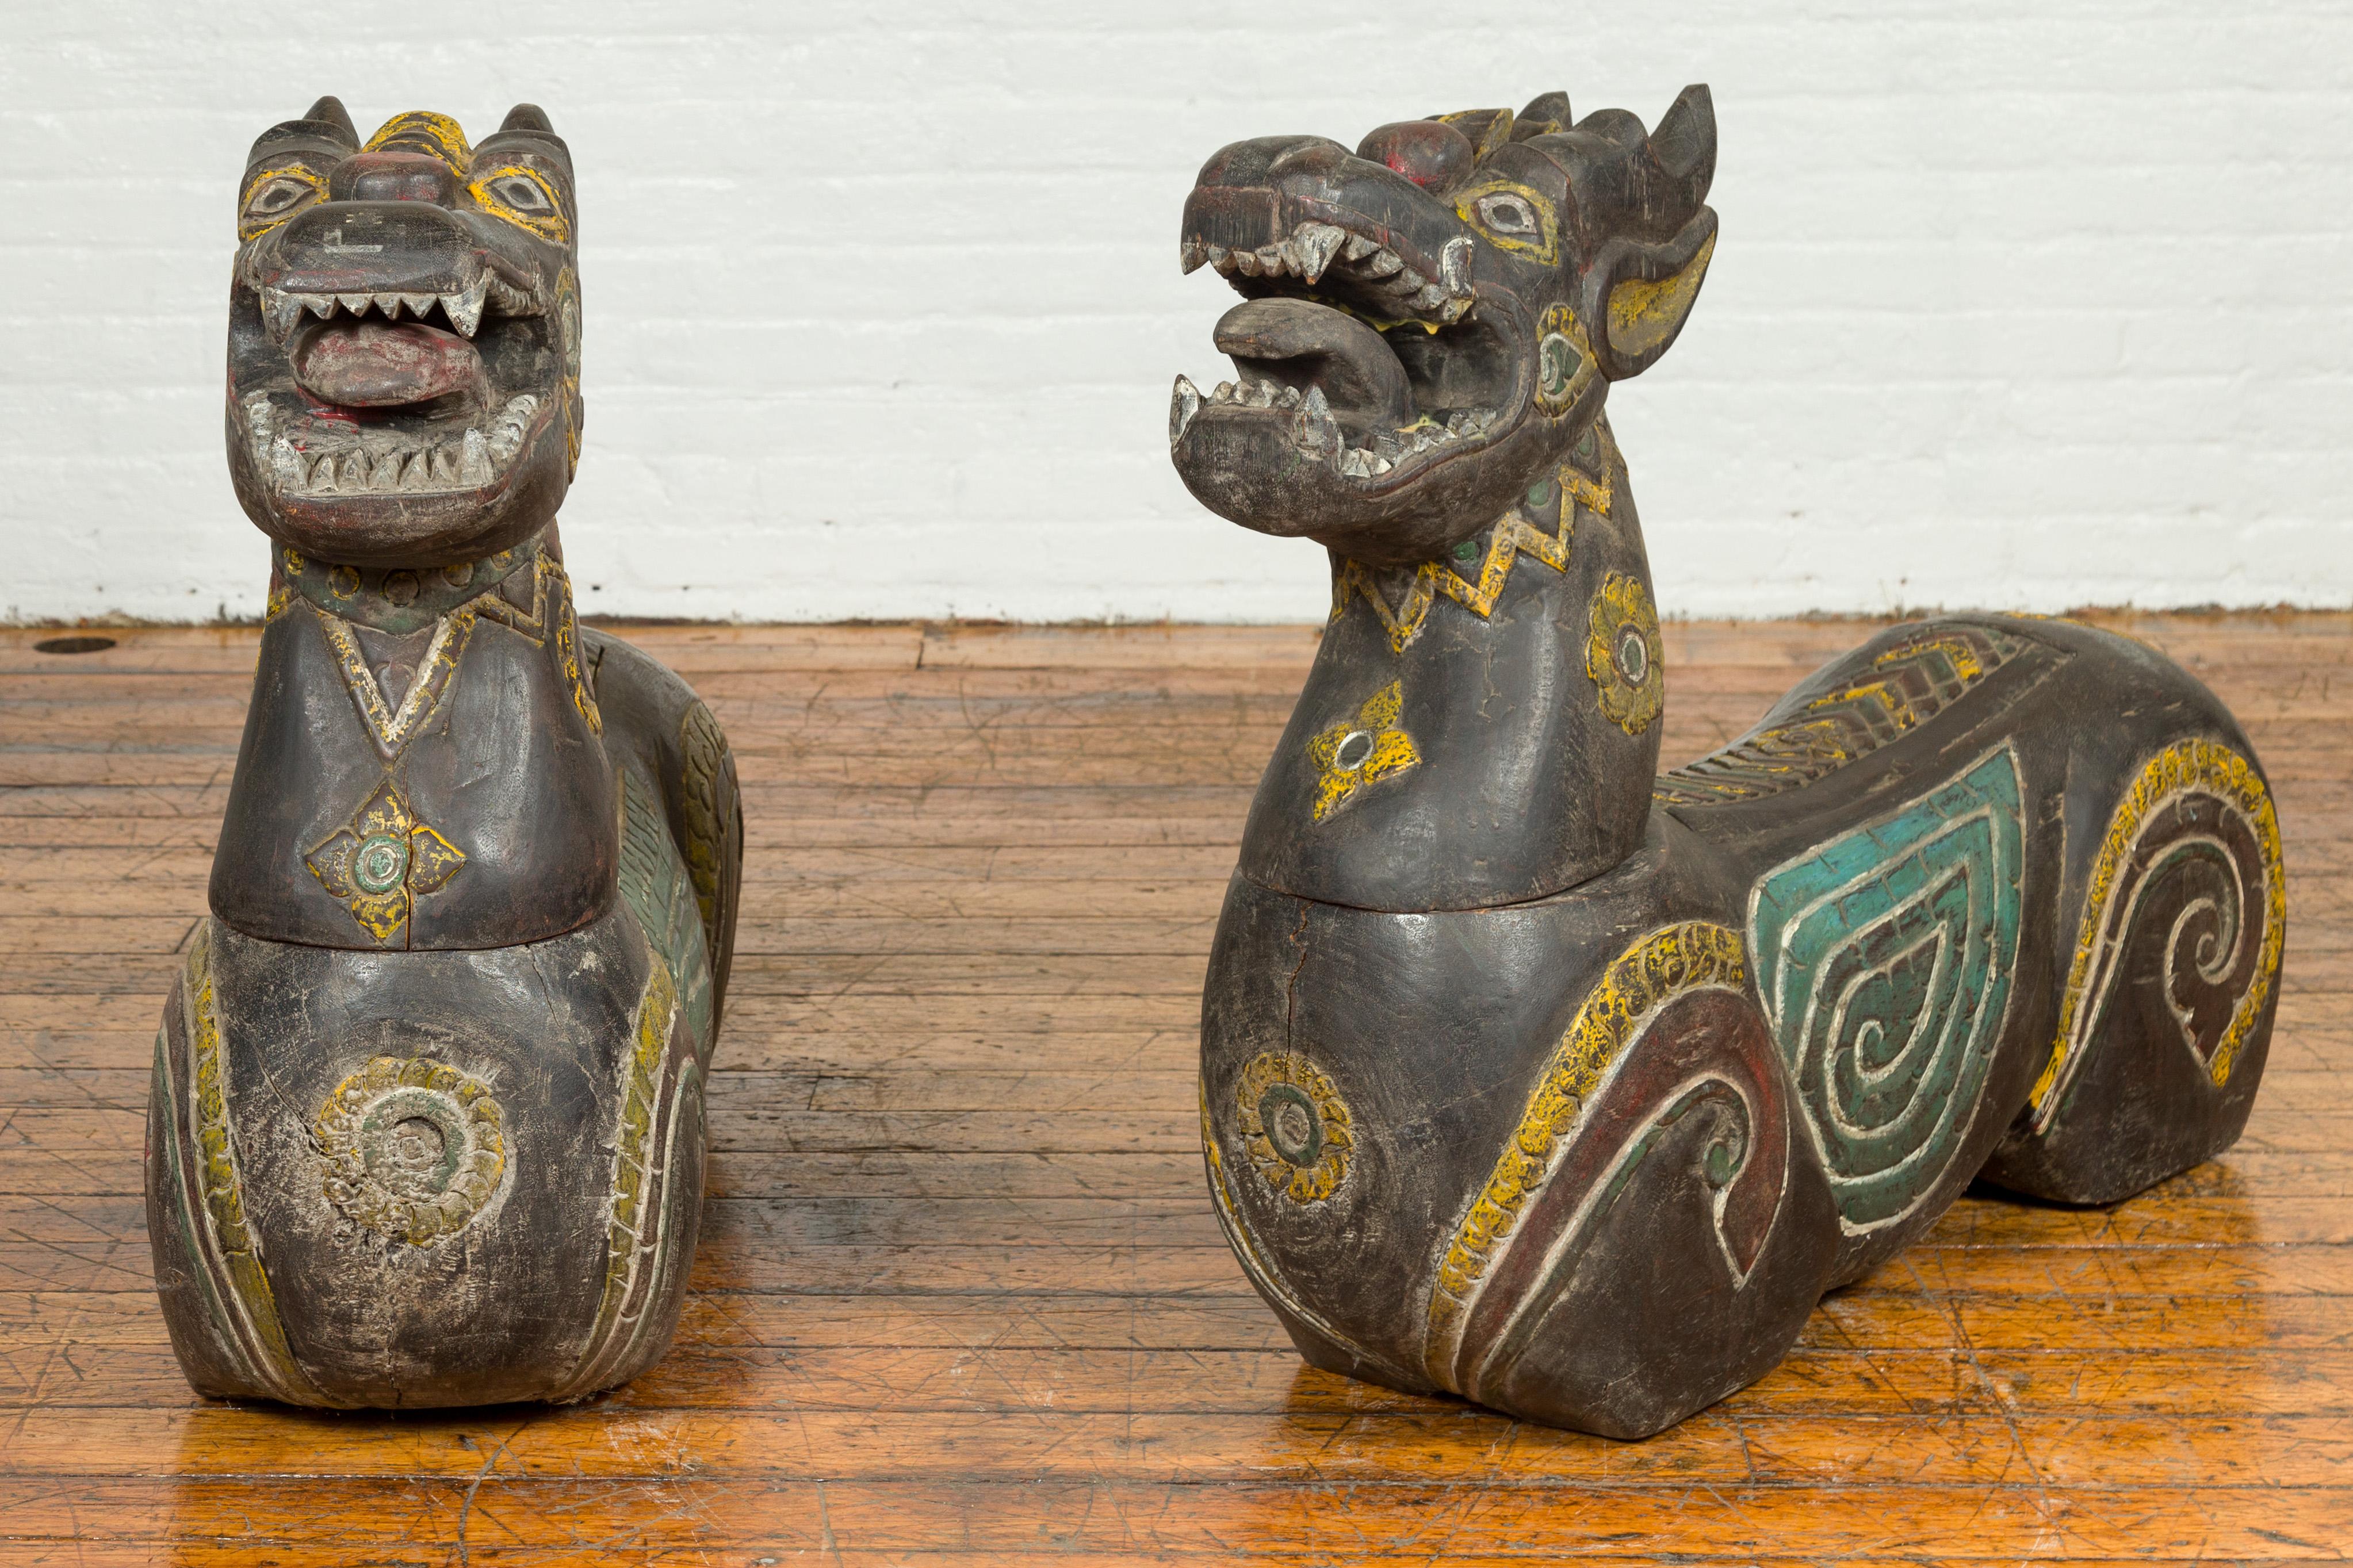 A pair of antique Chiang Mai wood mythical guardian animals from Thailand. Carved in Chiang Mai, Northern Thailand, this pair of mythical guardian animals attracts our attention with their striking features and polychrome finish. Made of old wood,